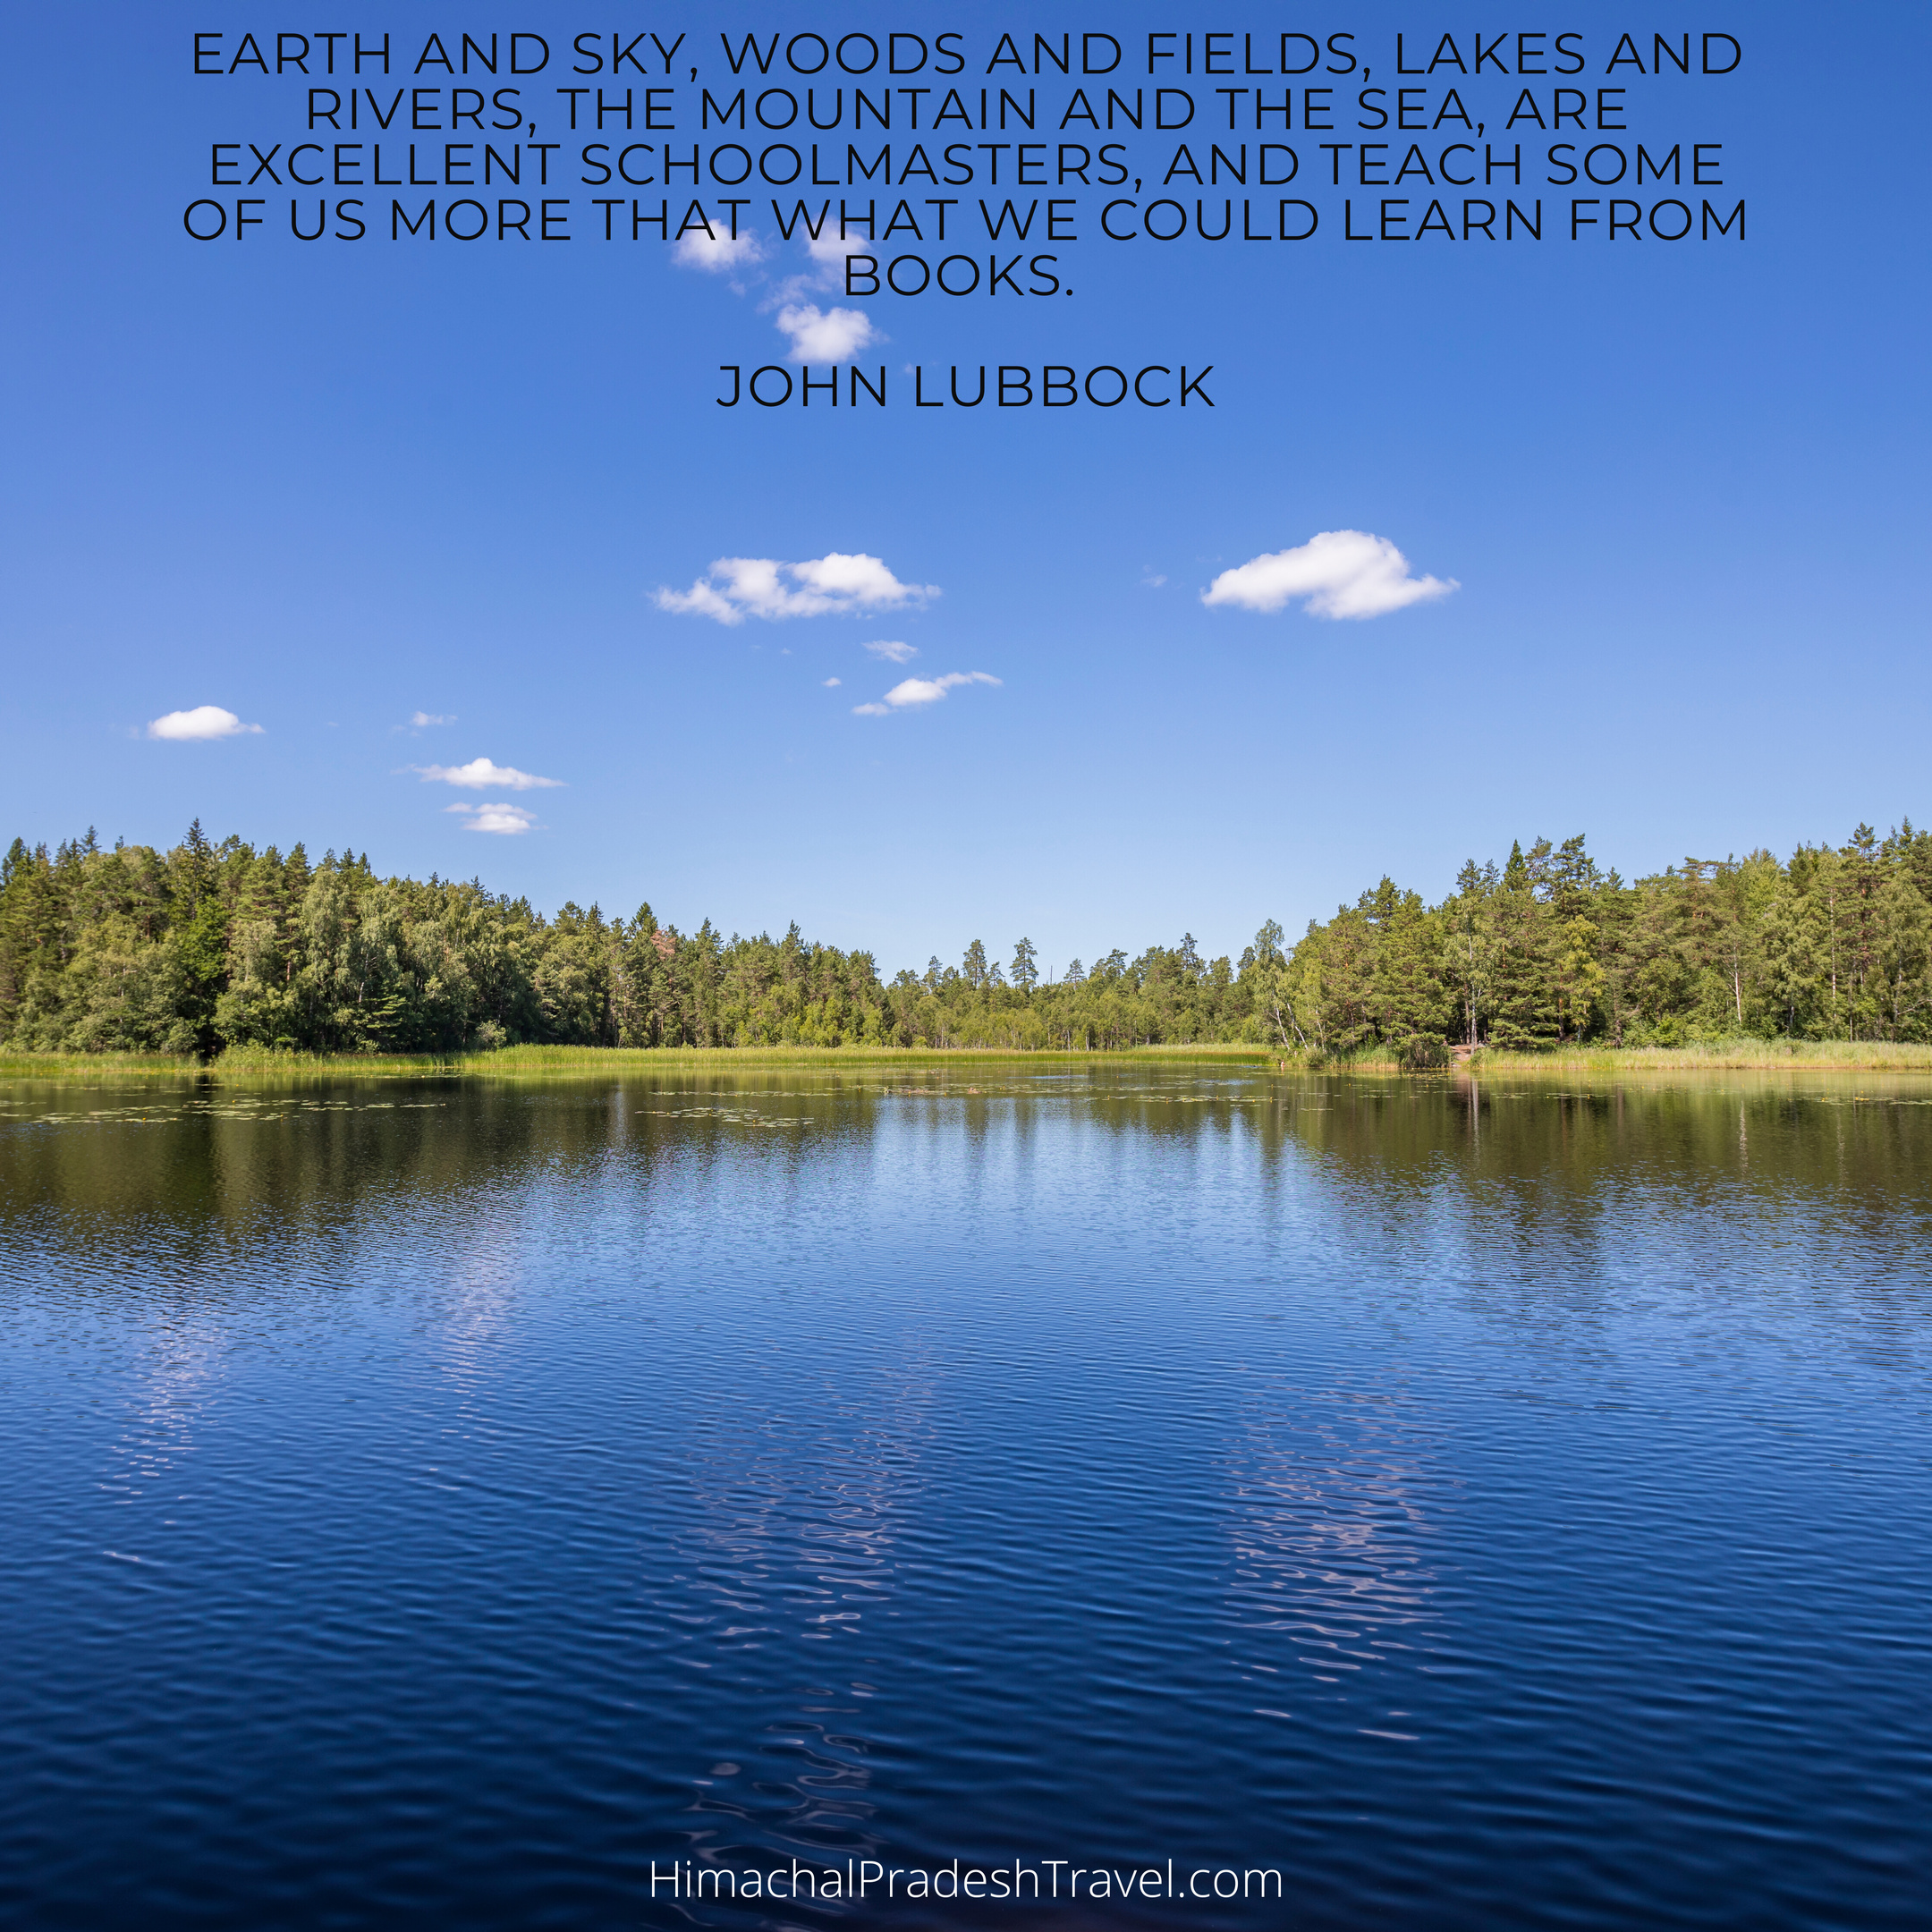 “Earth and sky, woods and fields, lakes and rivers, the mountain and the sea, are excellent schoolmasters, and teach some of us more that what we could learn from books.” – John Lubbock